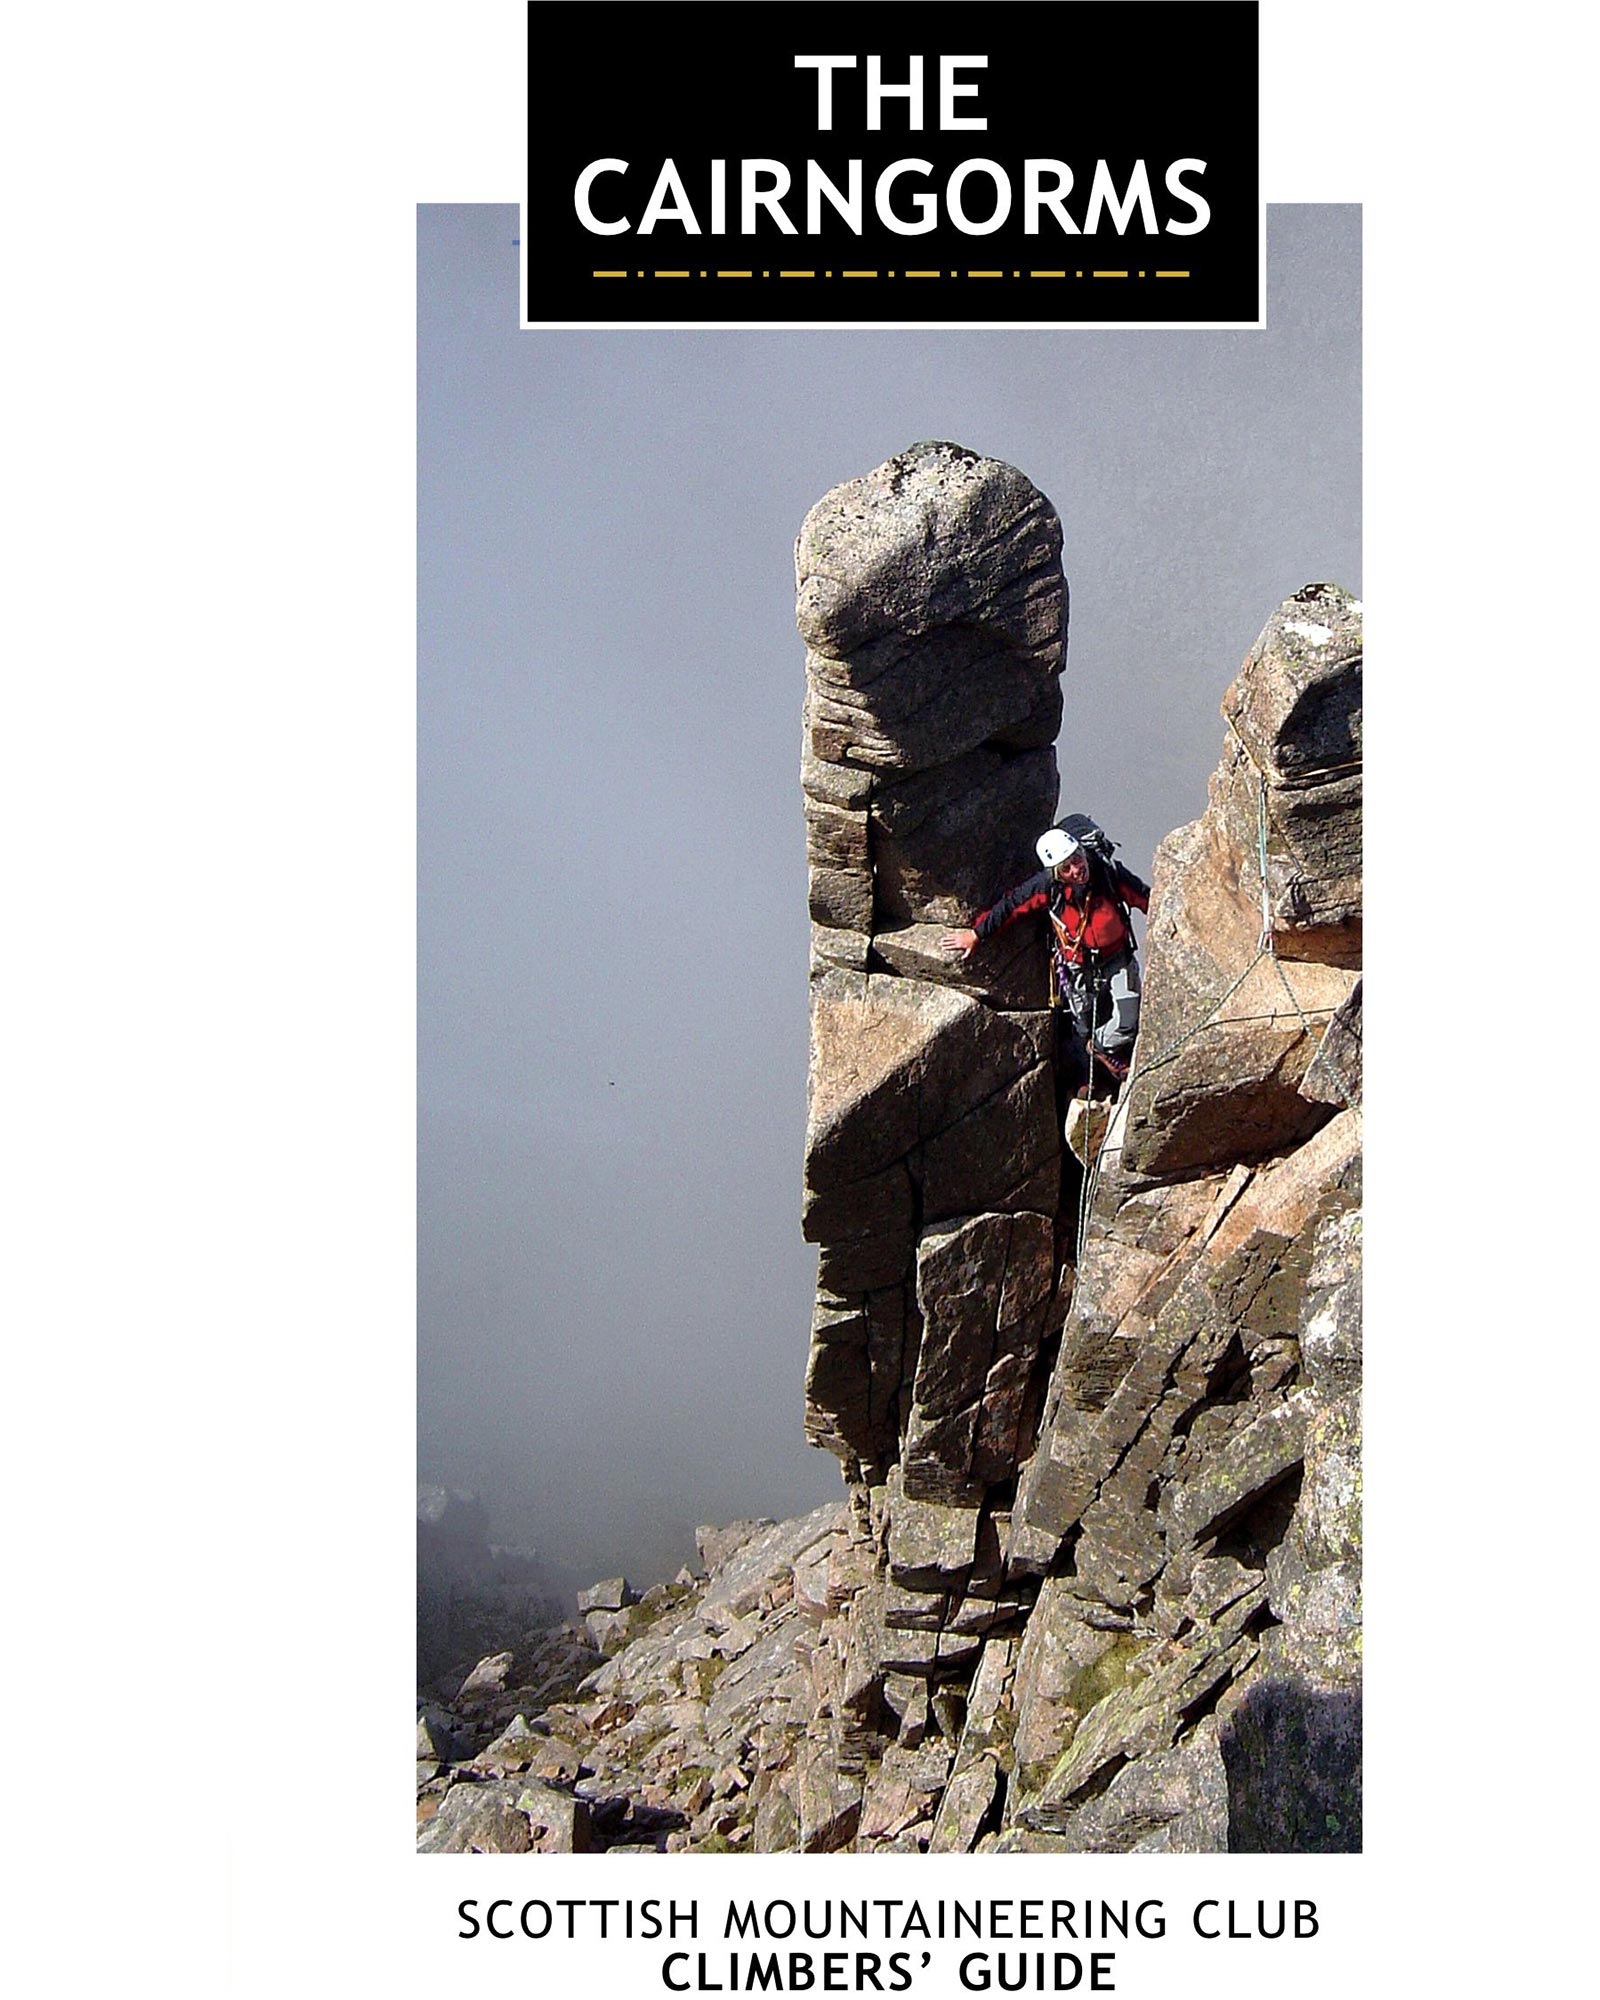 Scottish Mountaineering Club Cairngorms Guide Book